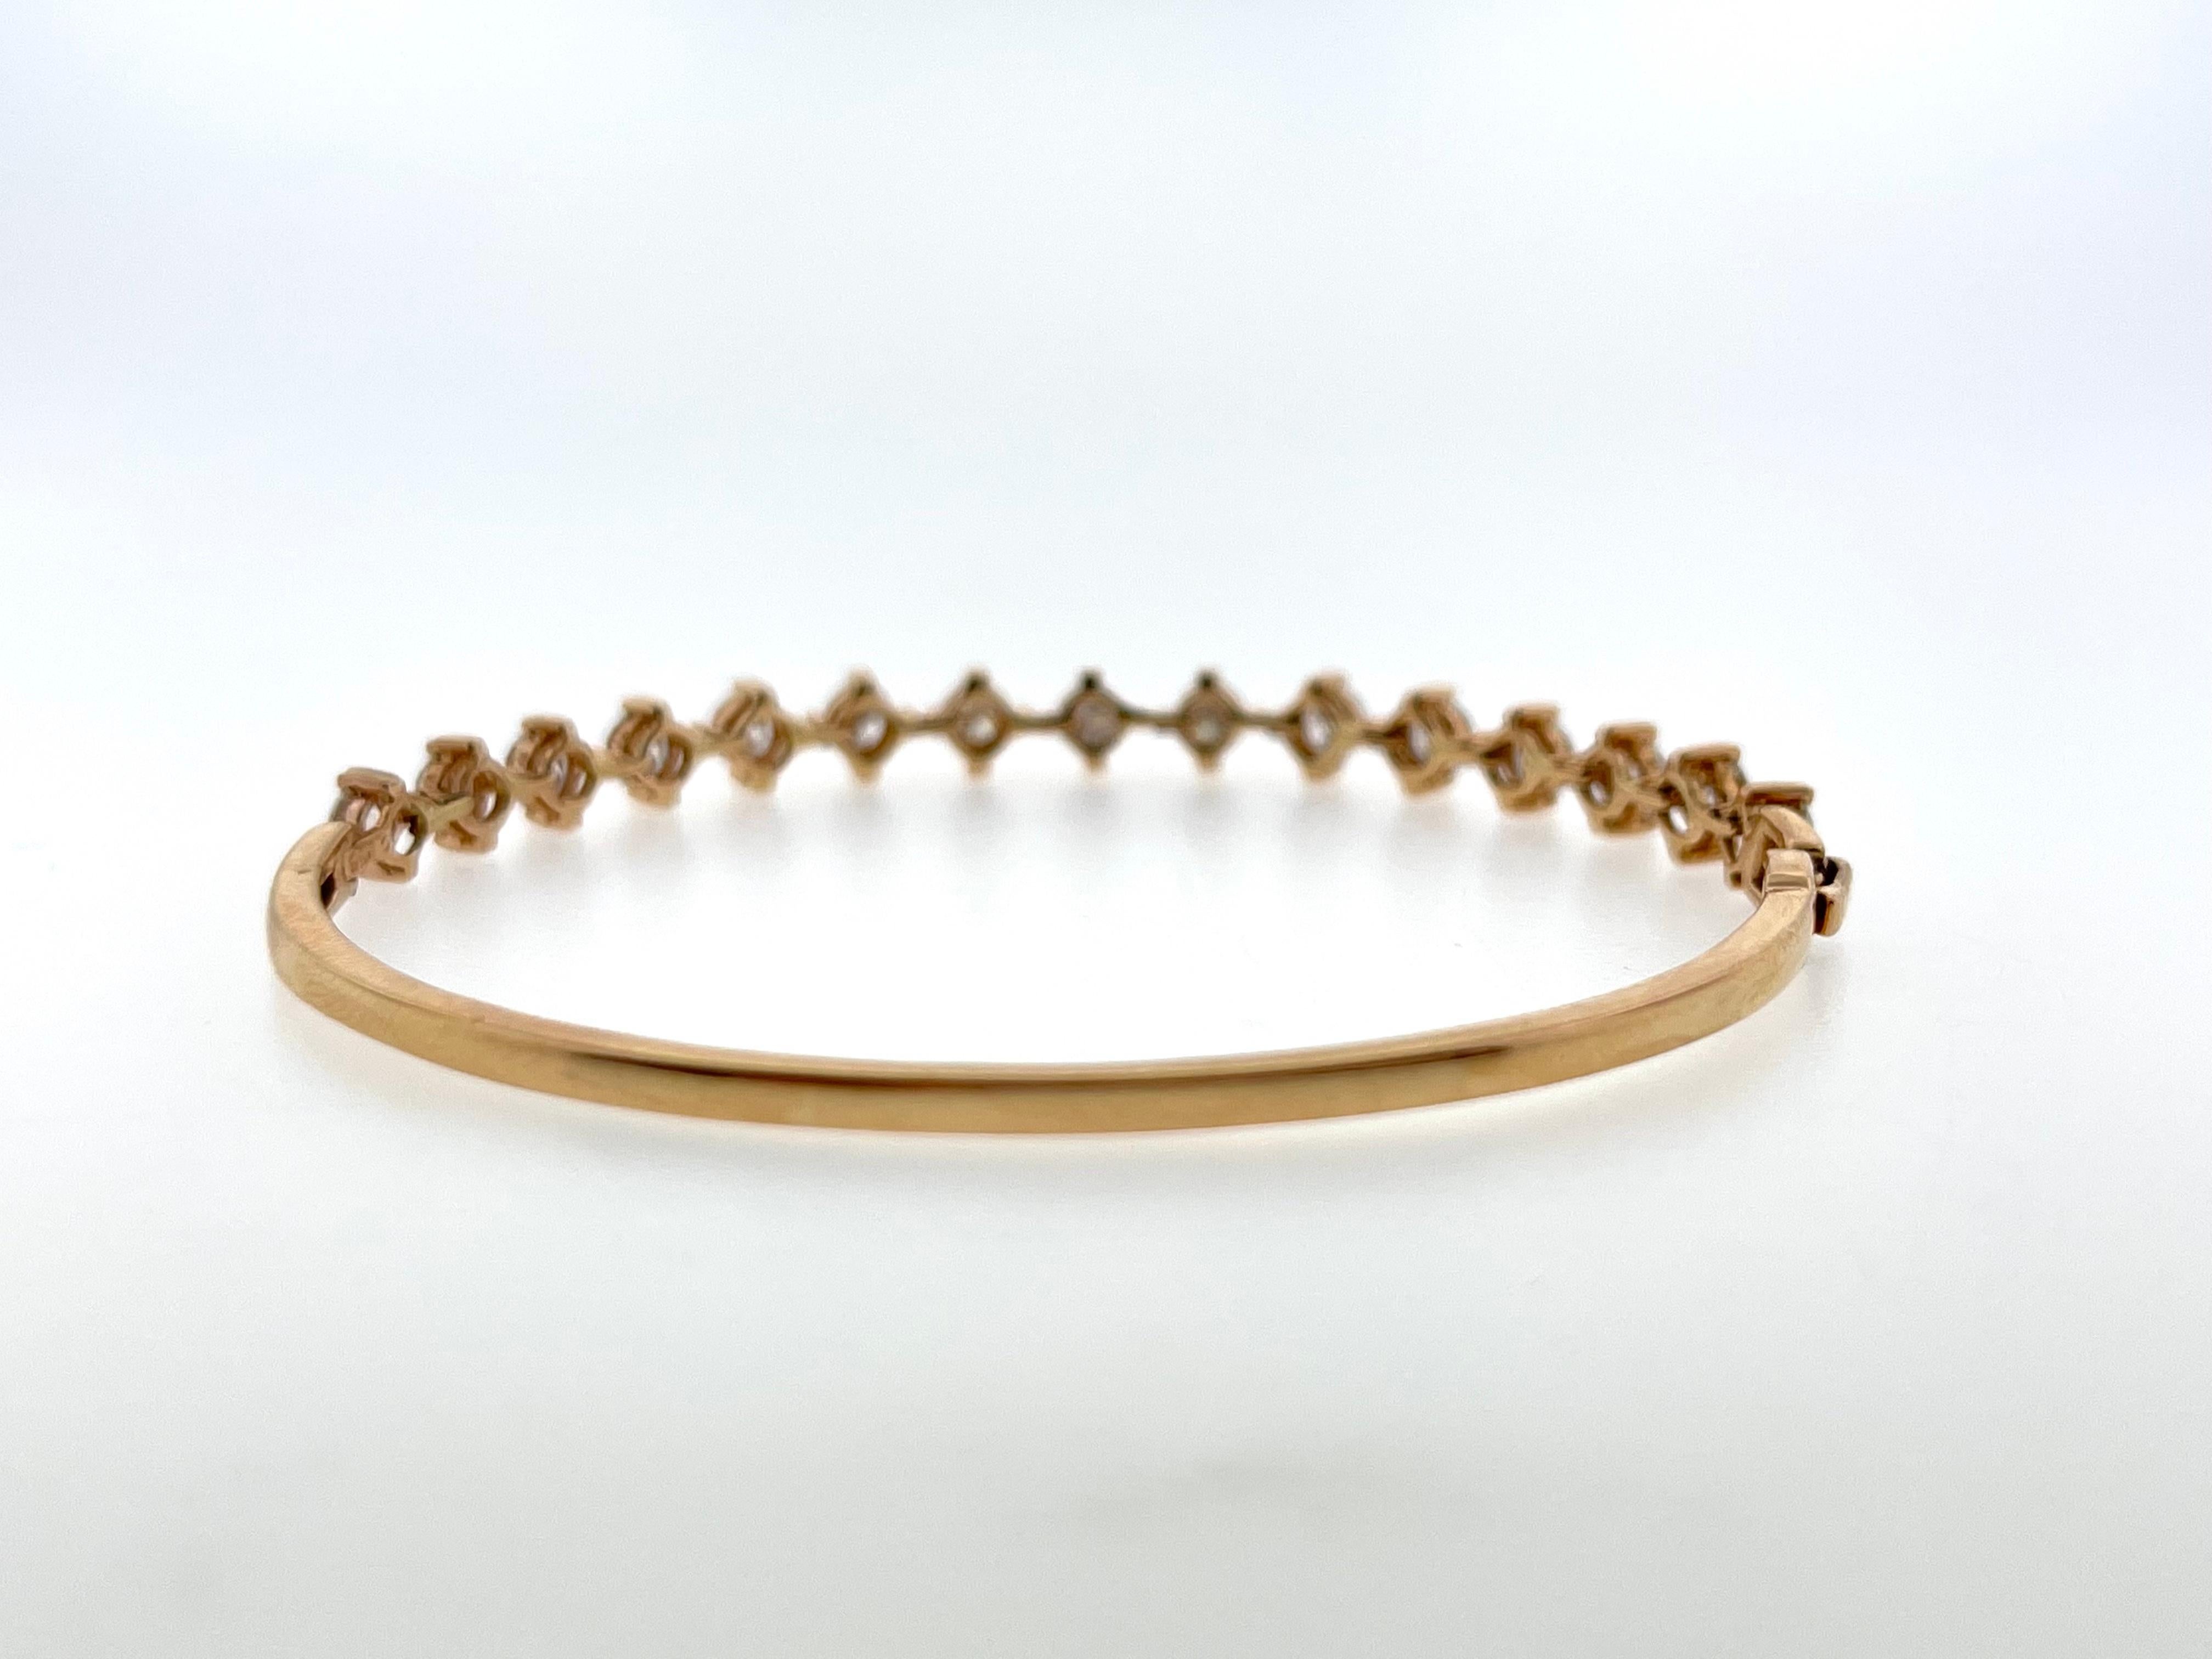 Make any outfit come together with this flexible rose gold tennis bracelet set in 18K! 

This bracelet holds 15 bright round diamonds G-VS in quality weighing 2.06ctw set in a 4 prong setting and it is 7